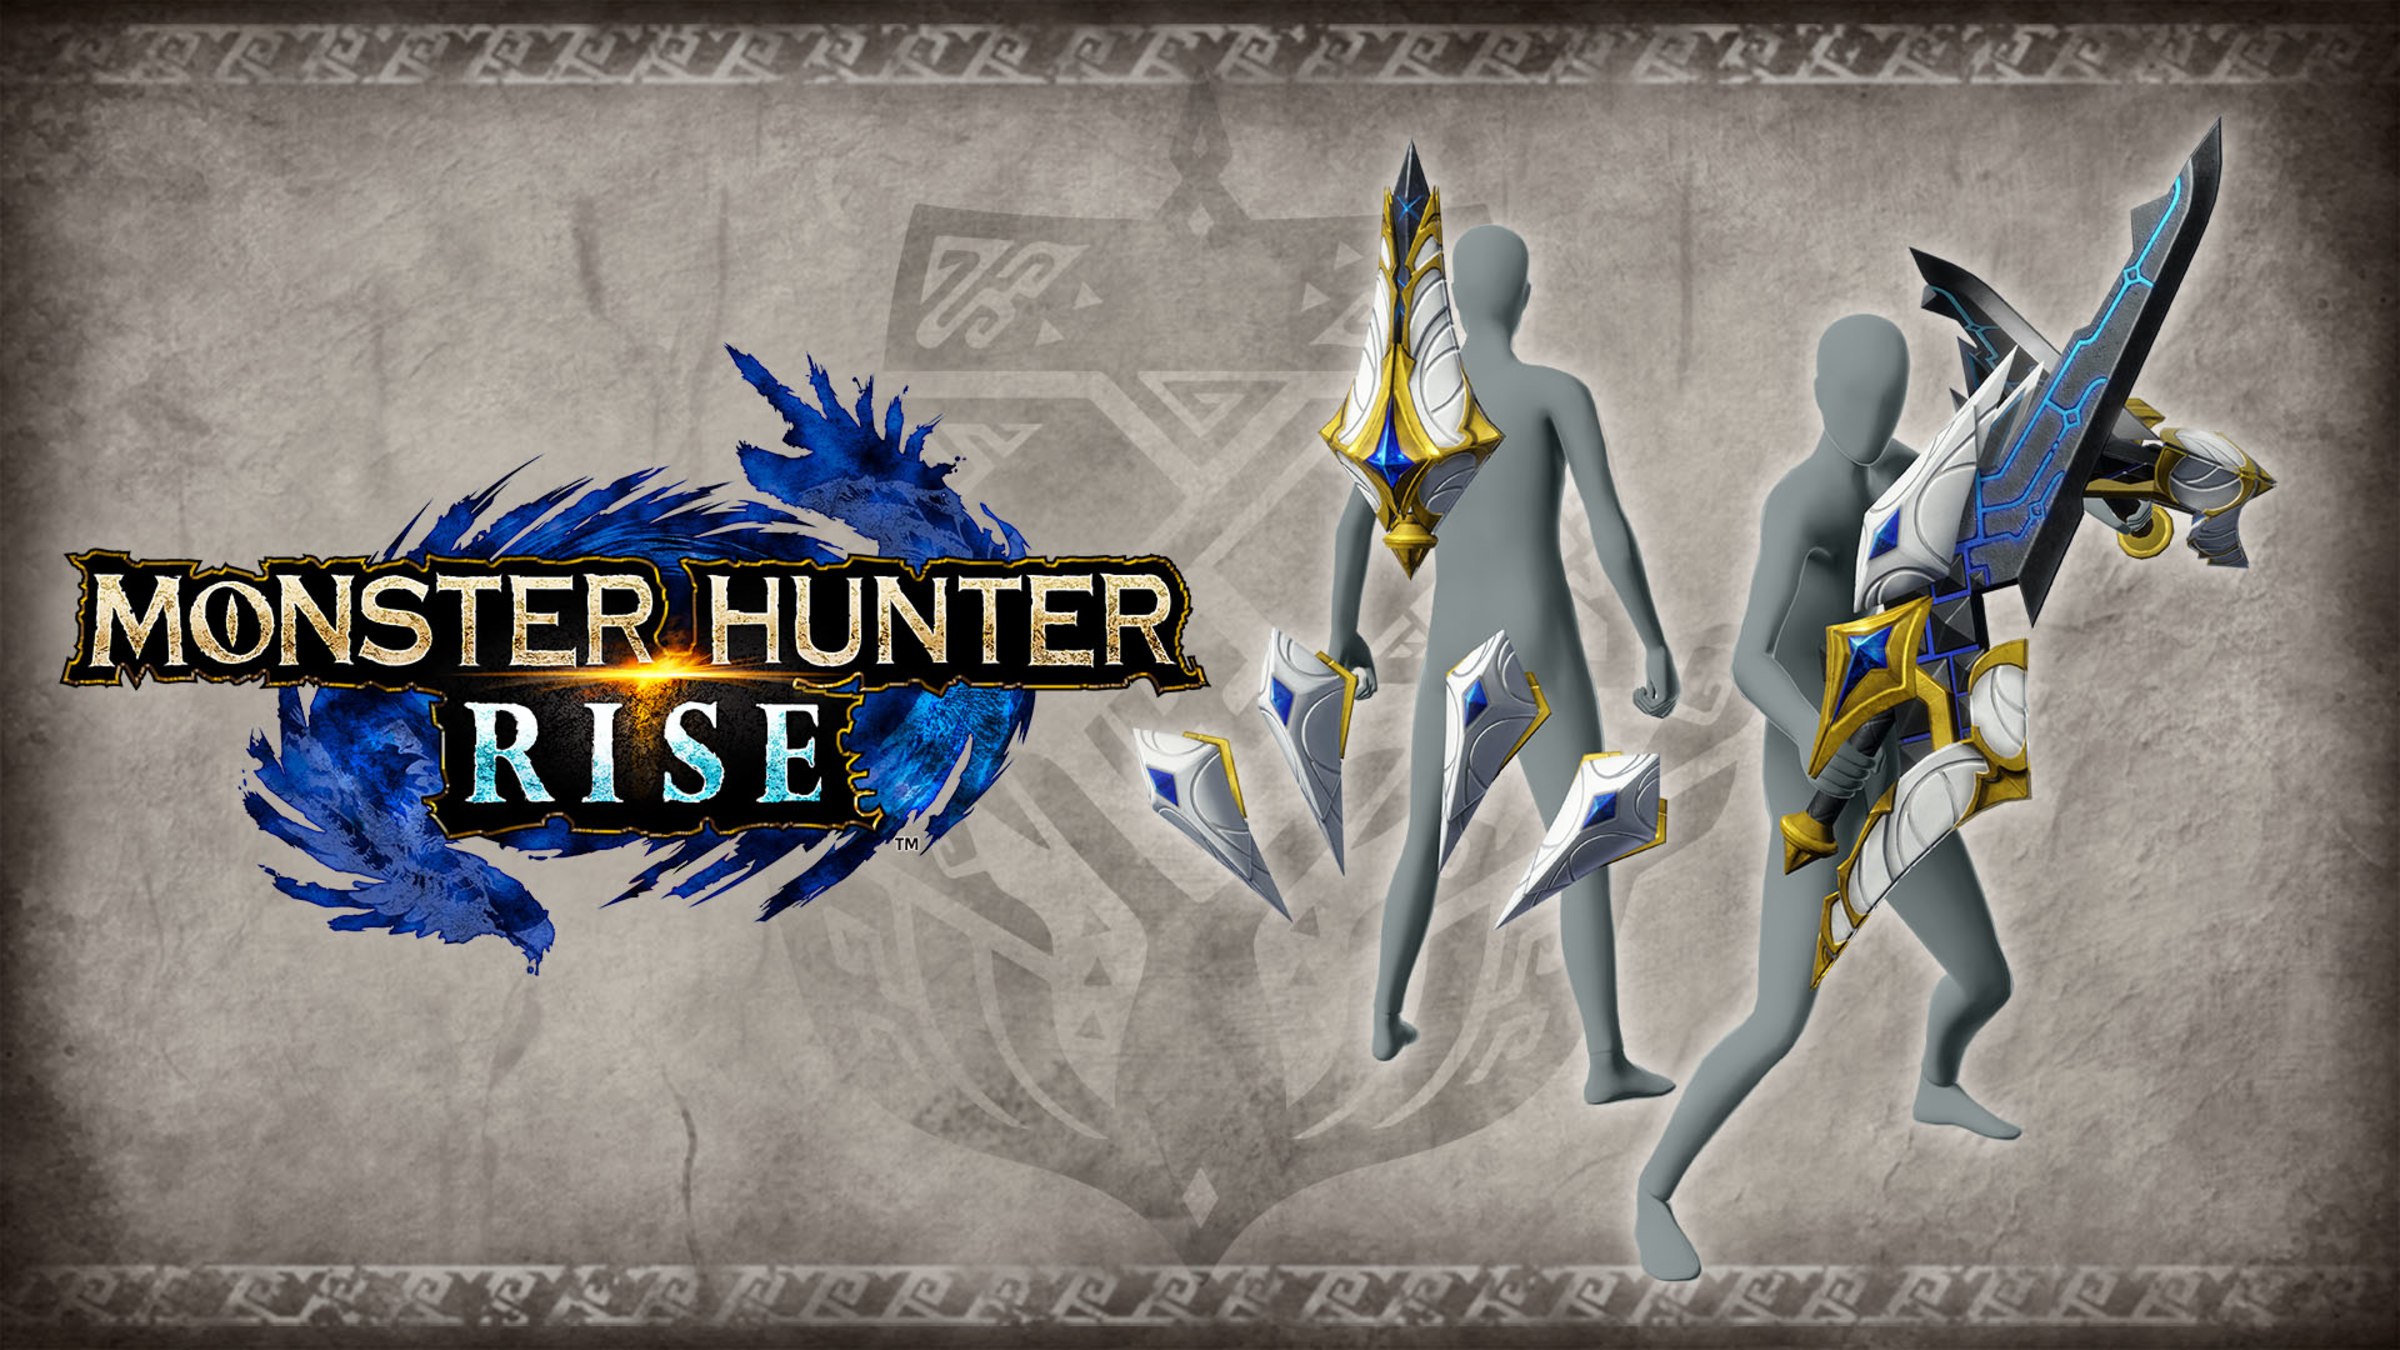 Monster Hunter Rise Dual Blades: Best builds, tips, and tricks